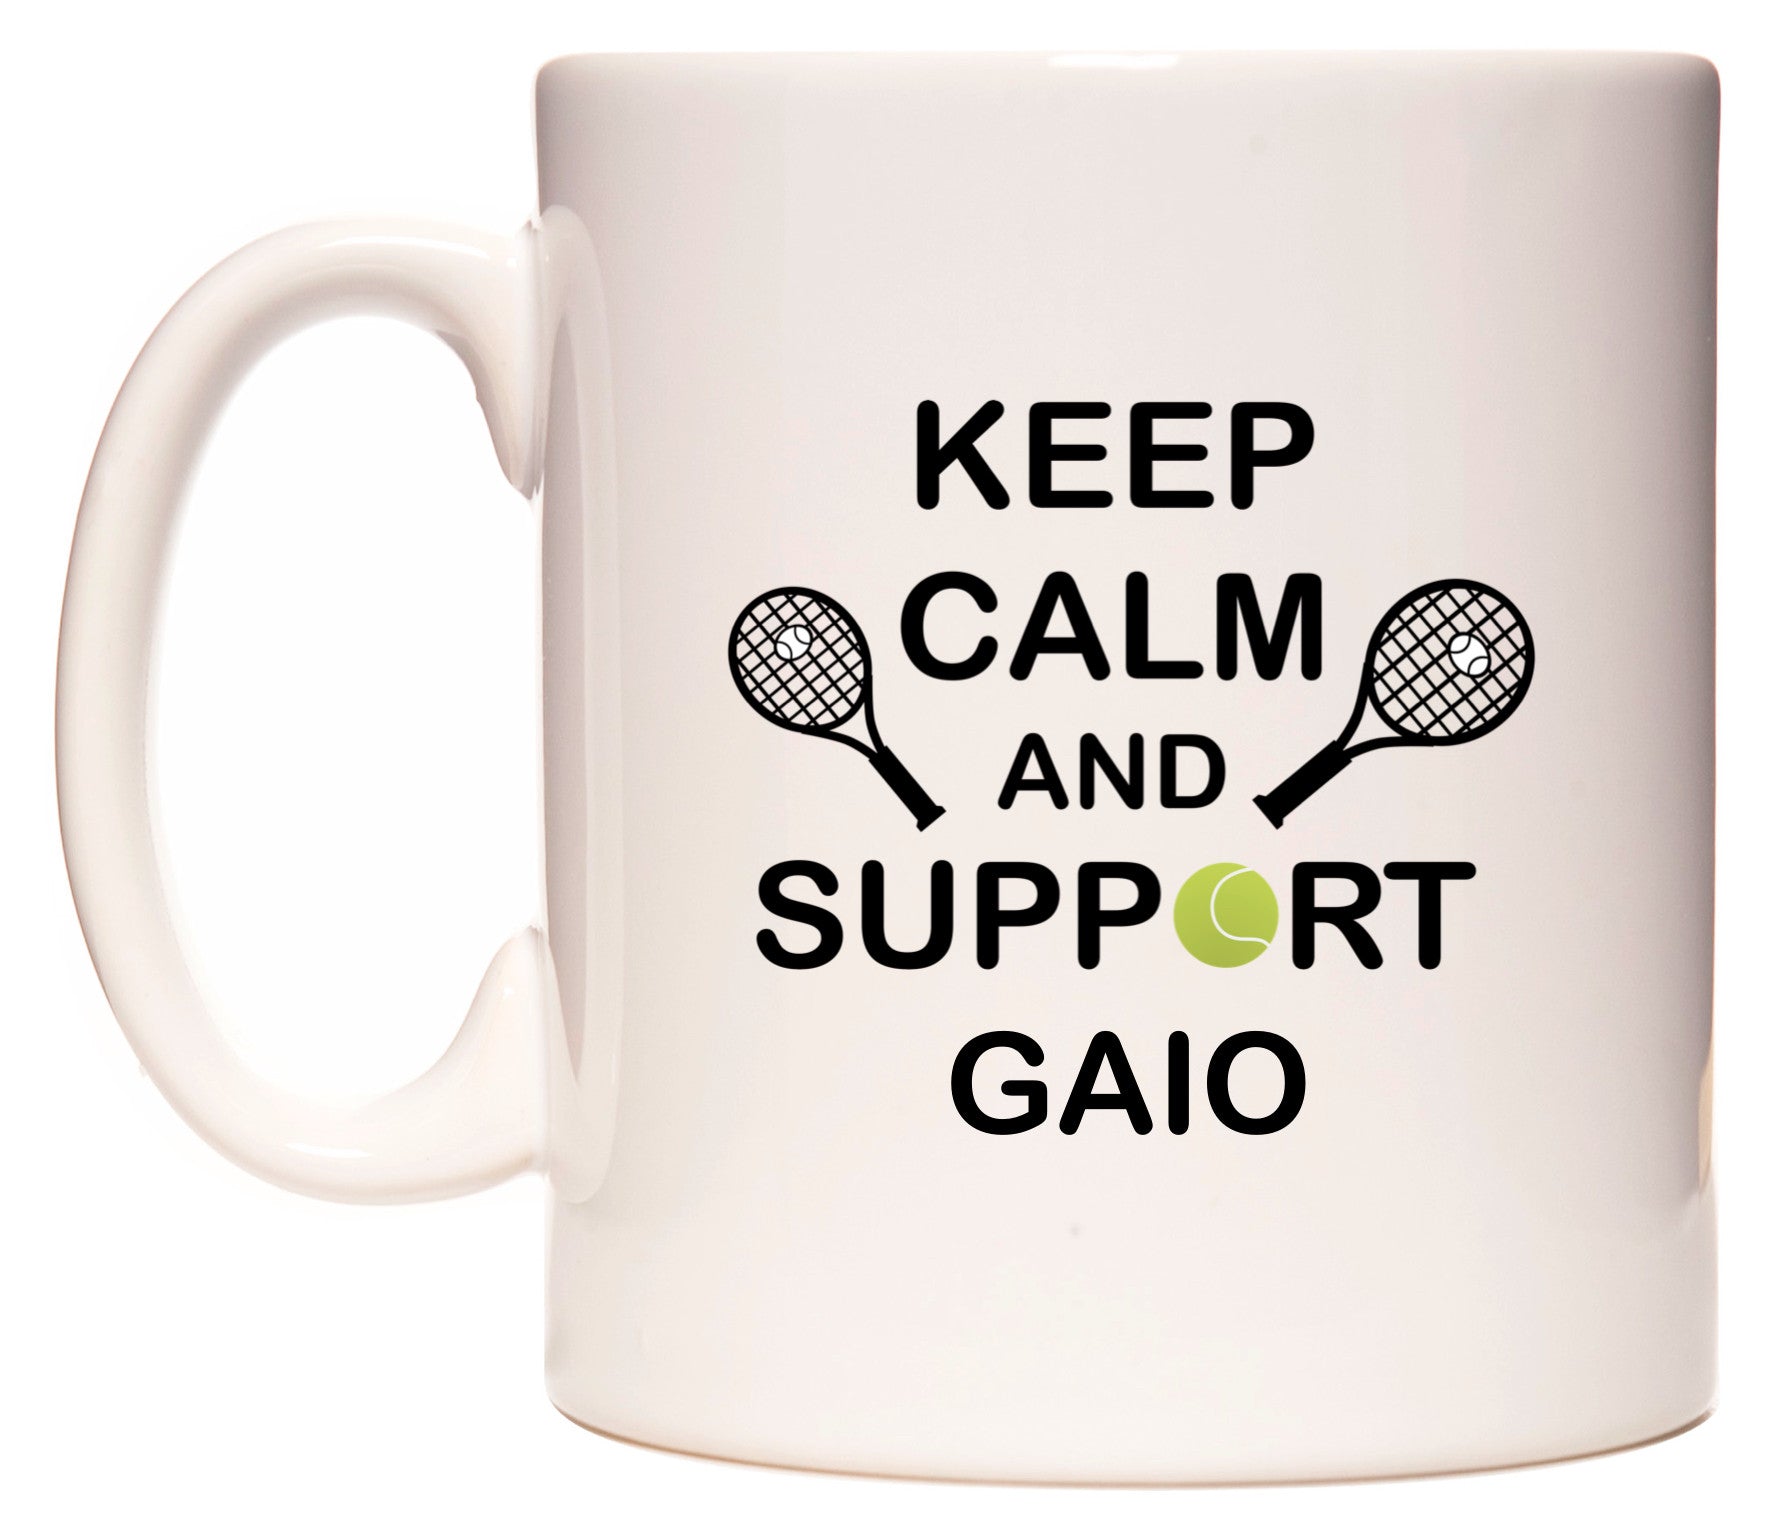 This mug features Keep Calm And Support Gaio